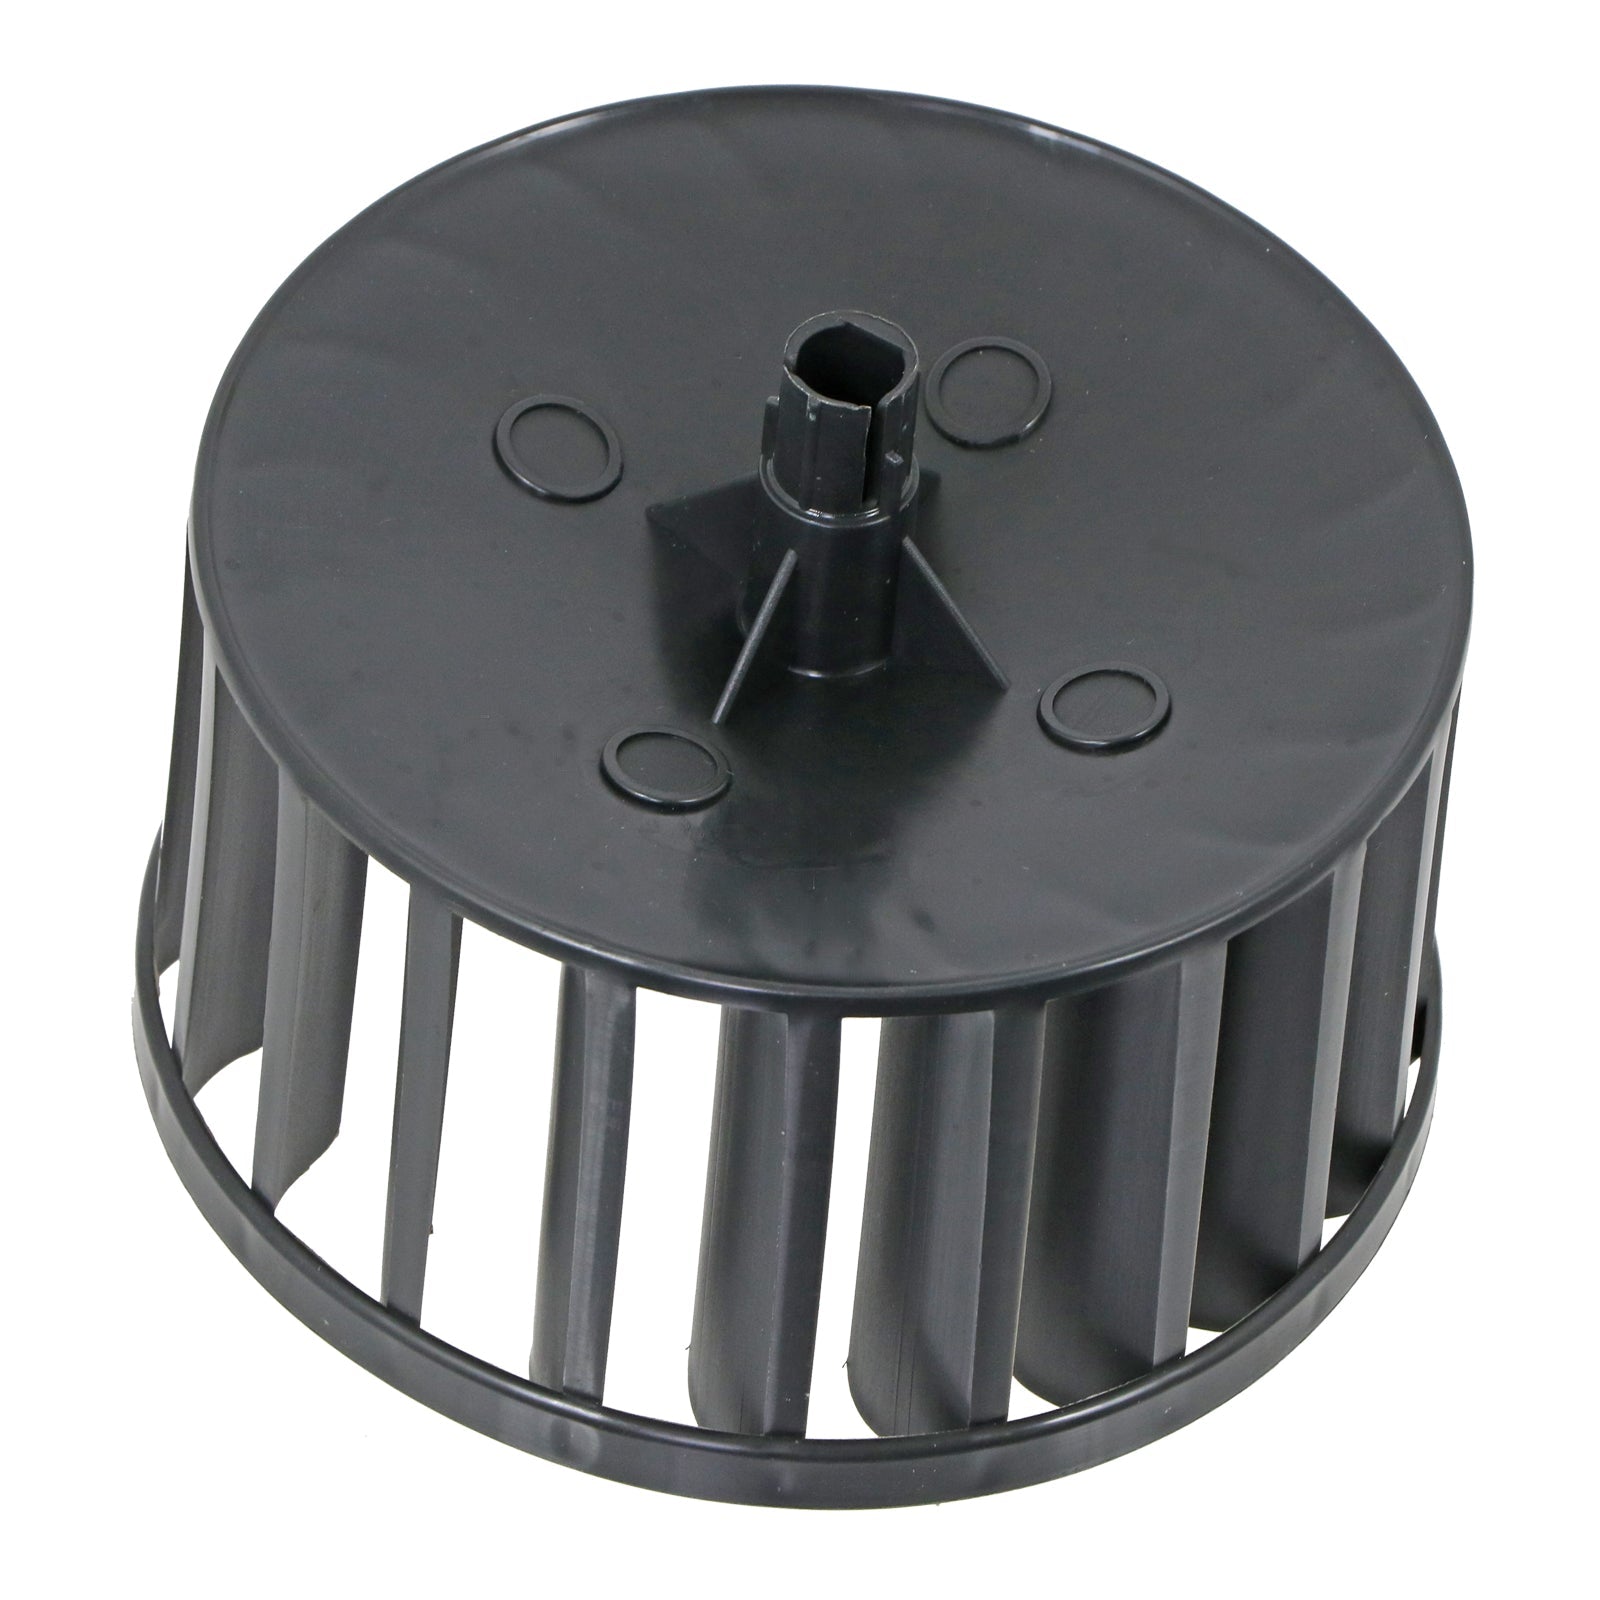 Fan Blade Assembly for Caple Tumble Dryer CL43 (0312 432 15001)